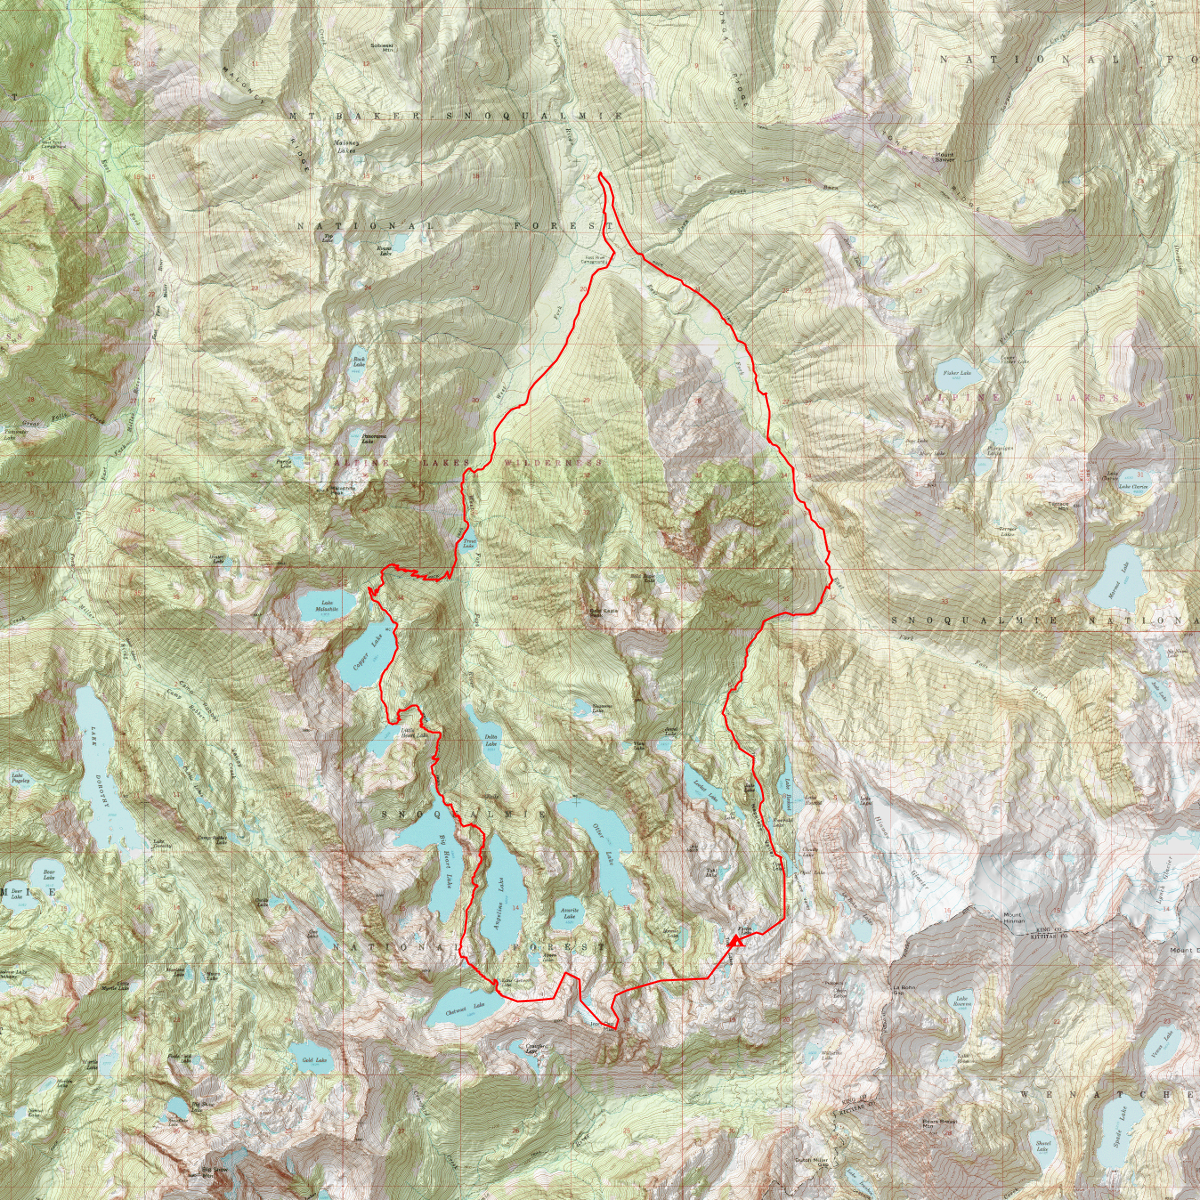 Alpine Lakes High Route